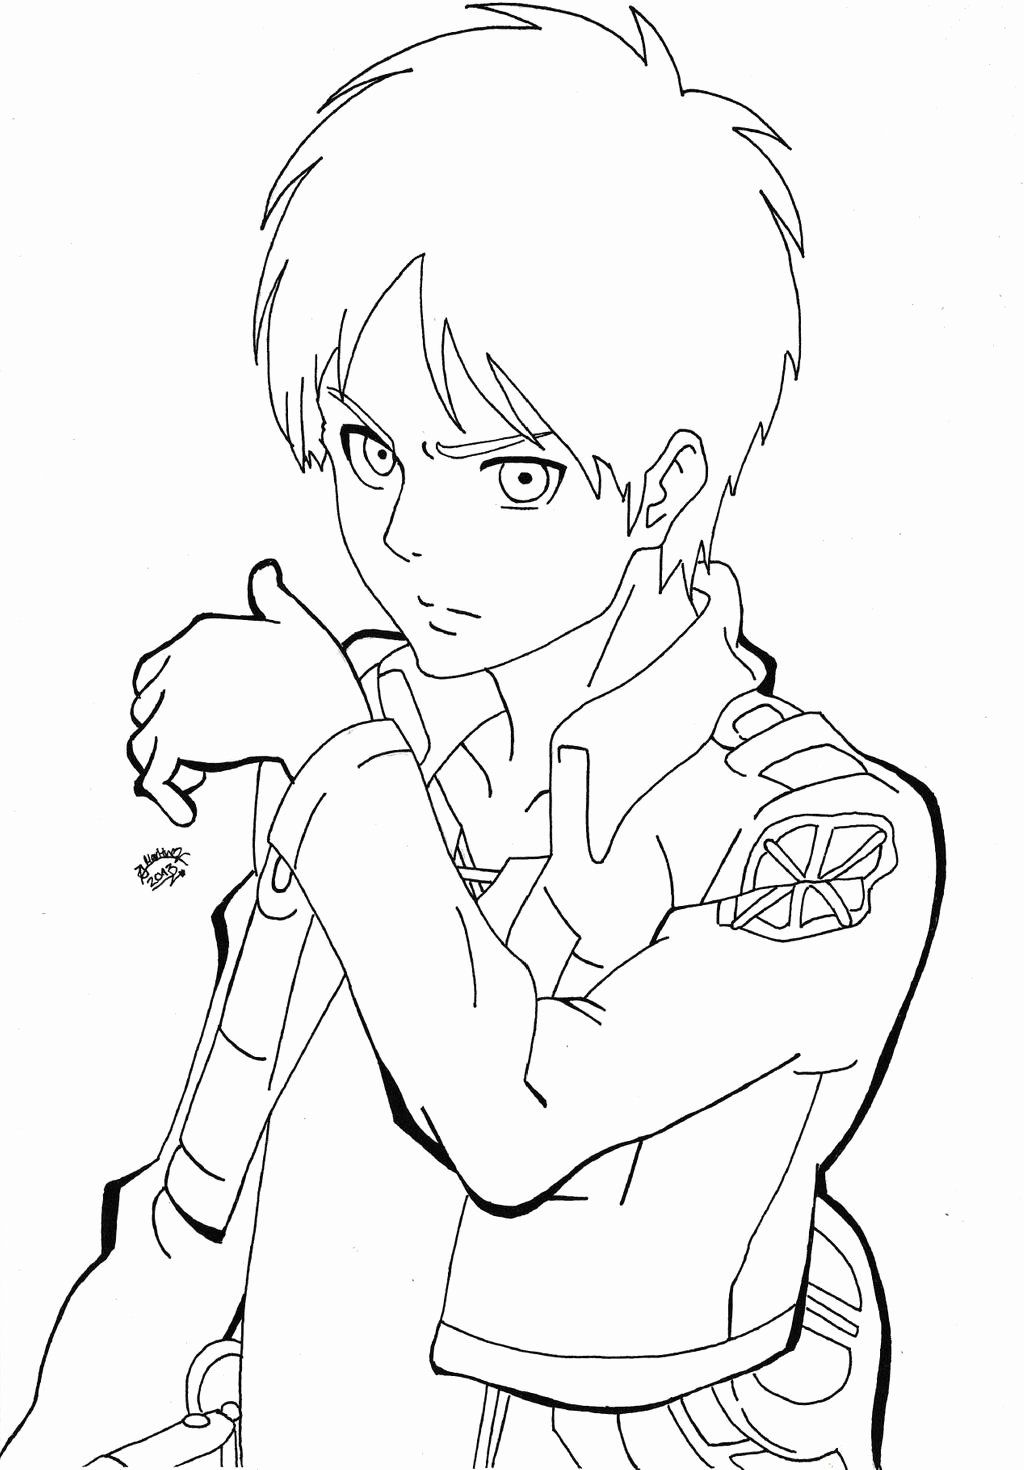 Anime Coloring Pages Aot   Coloring And Drawing   Coloring Home